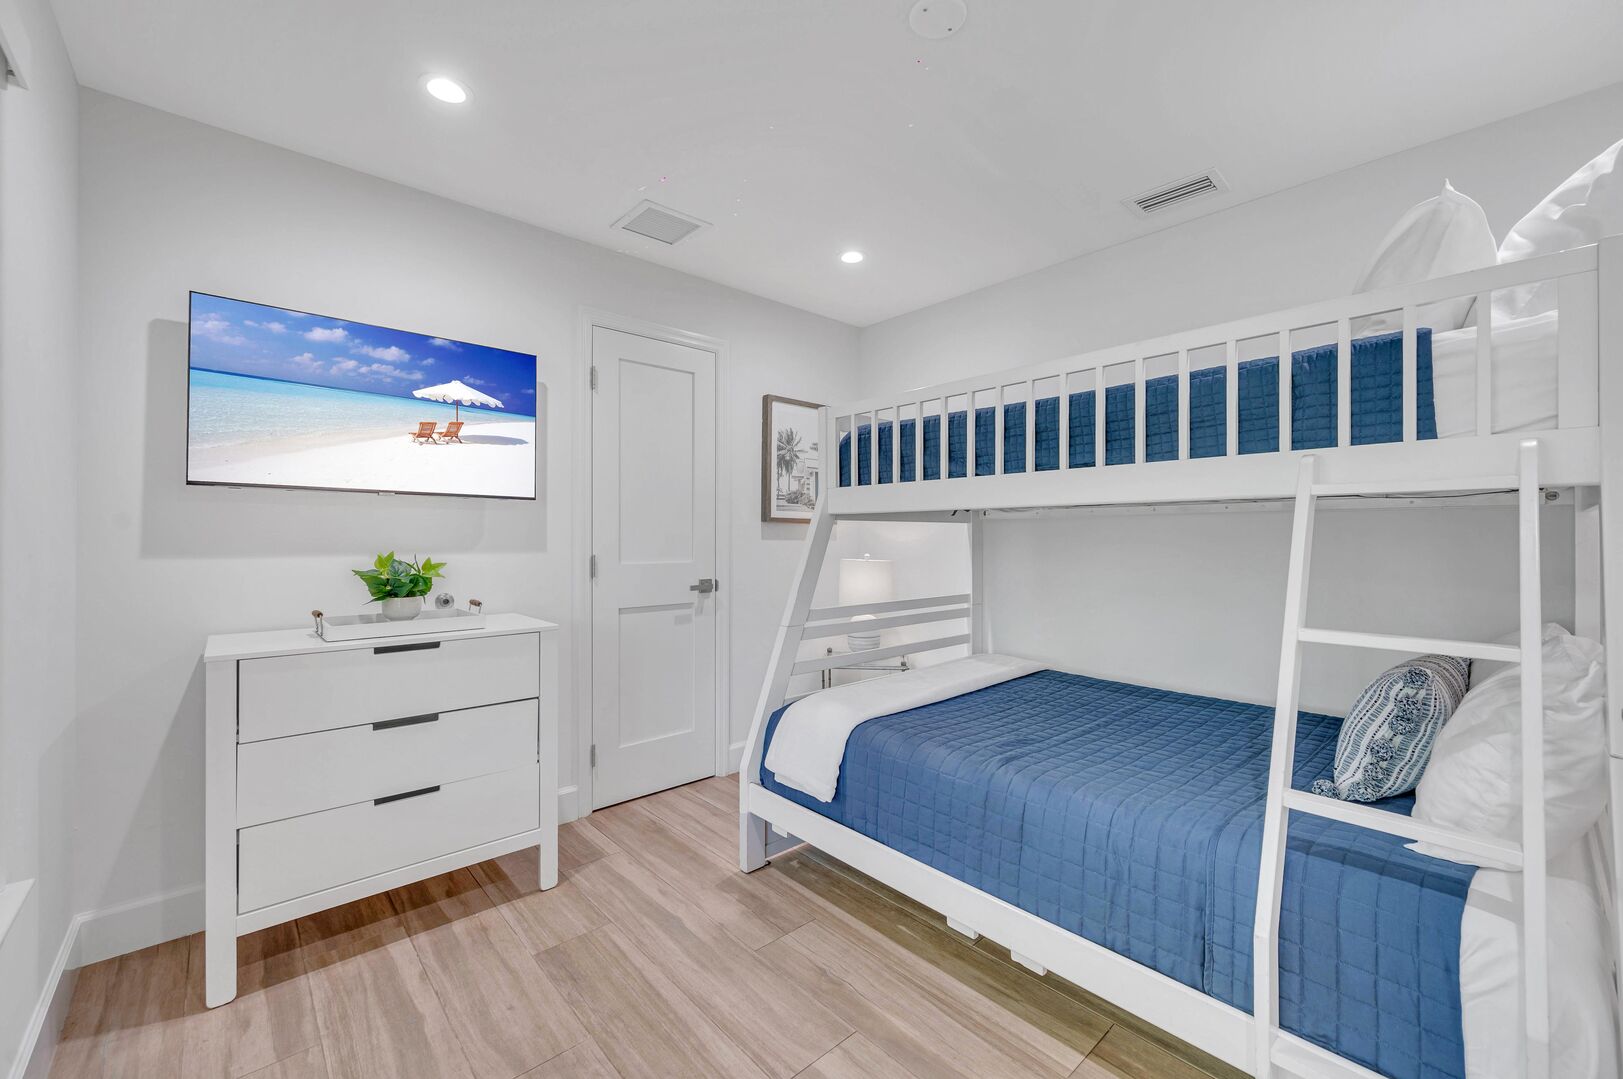 The fourth guest room features a Bunkbed. Full size on the bottom and Twin on top. Great fun to be had by kids!